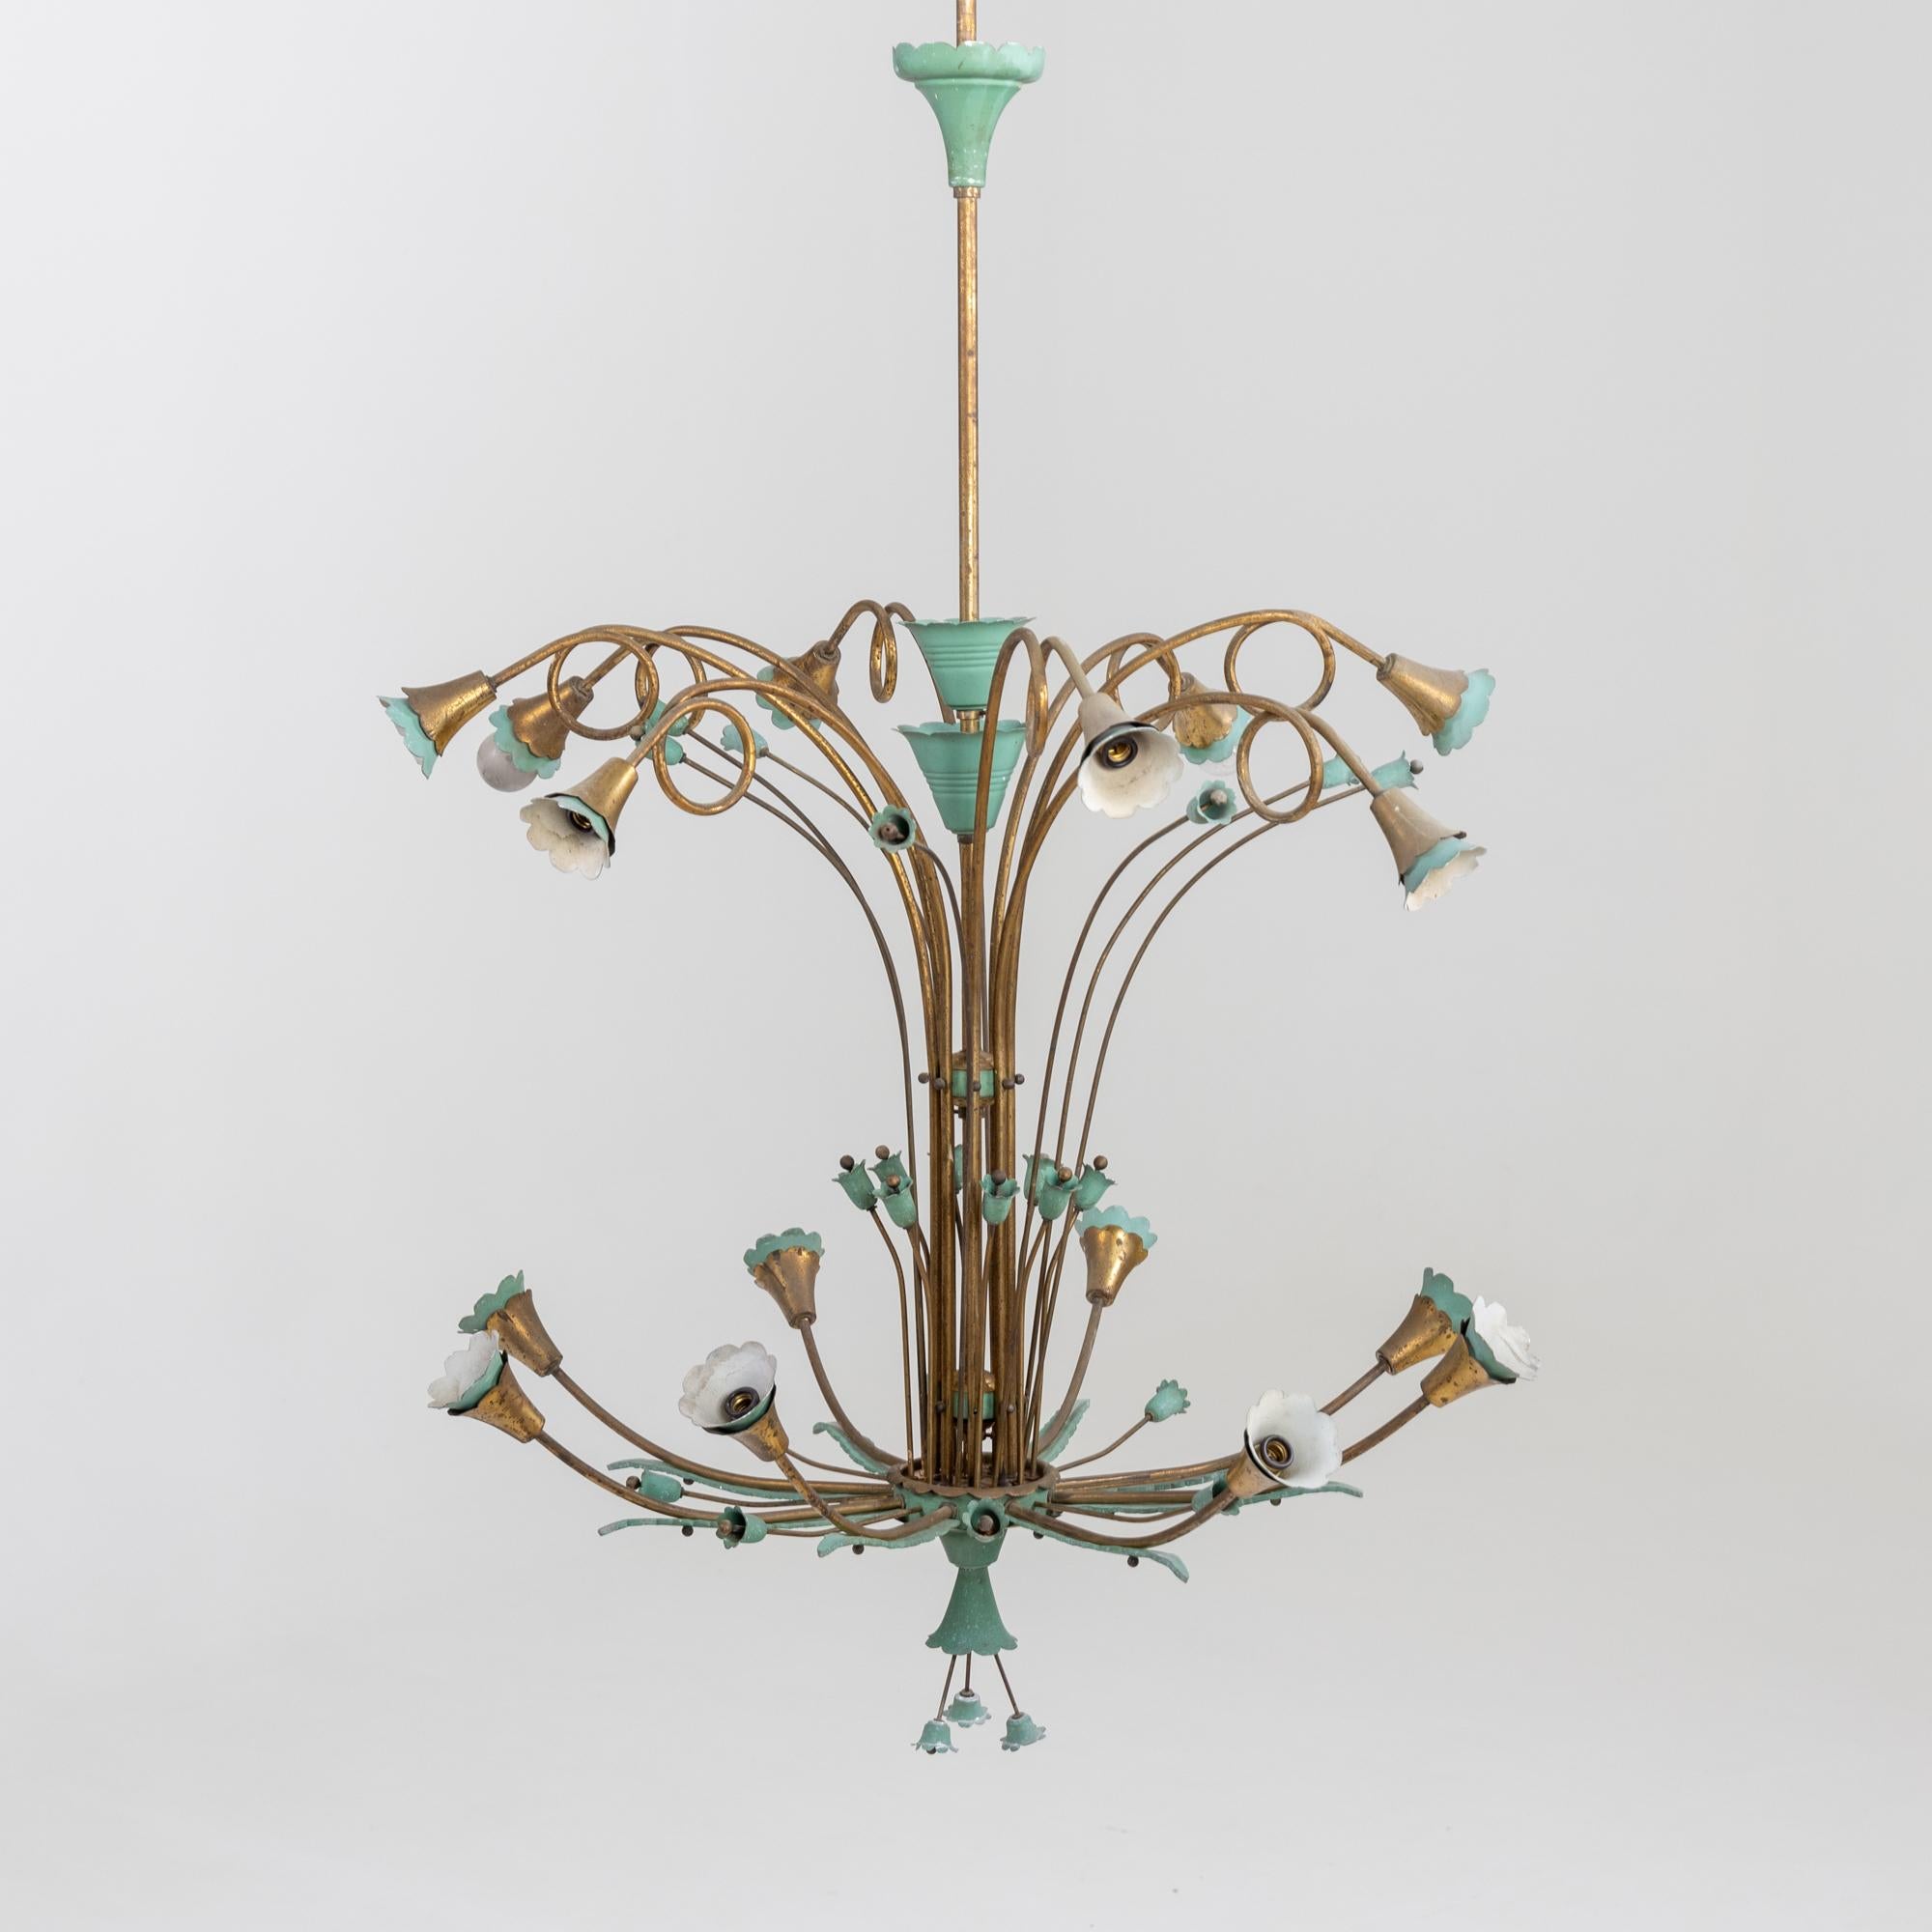 Italian Chandelier with Flower Decor, Mid-20th Century For Sale 1